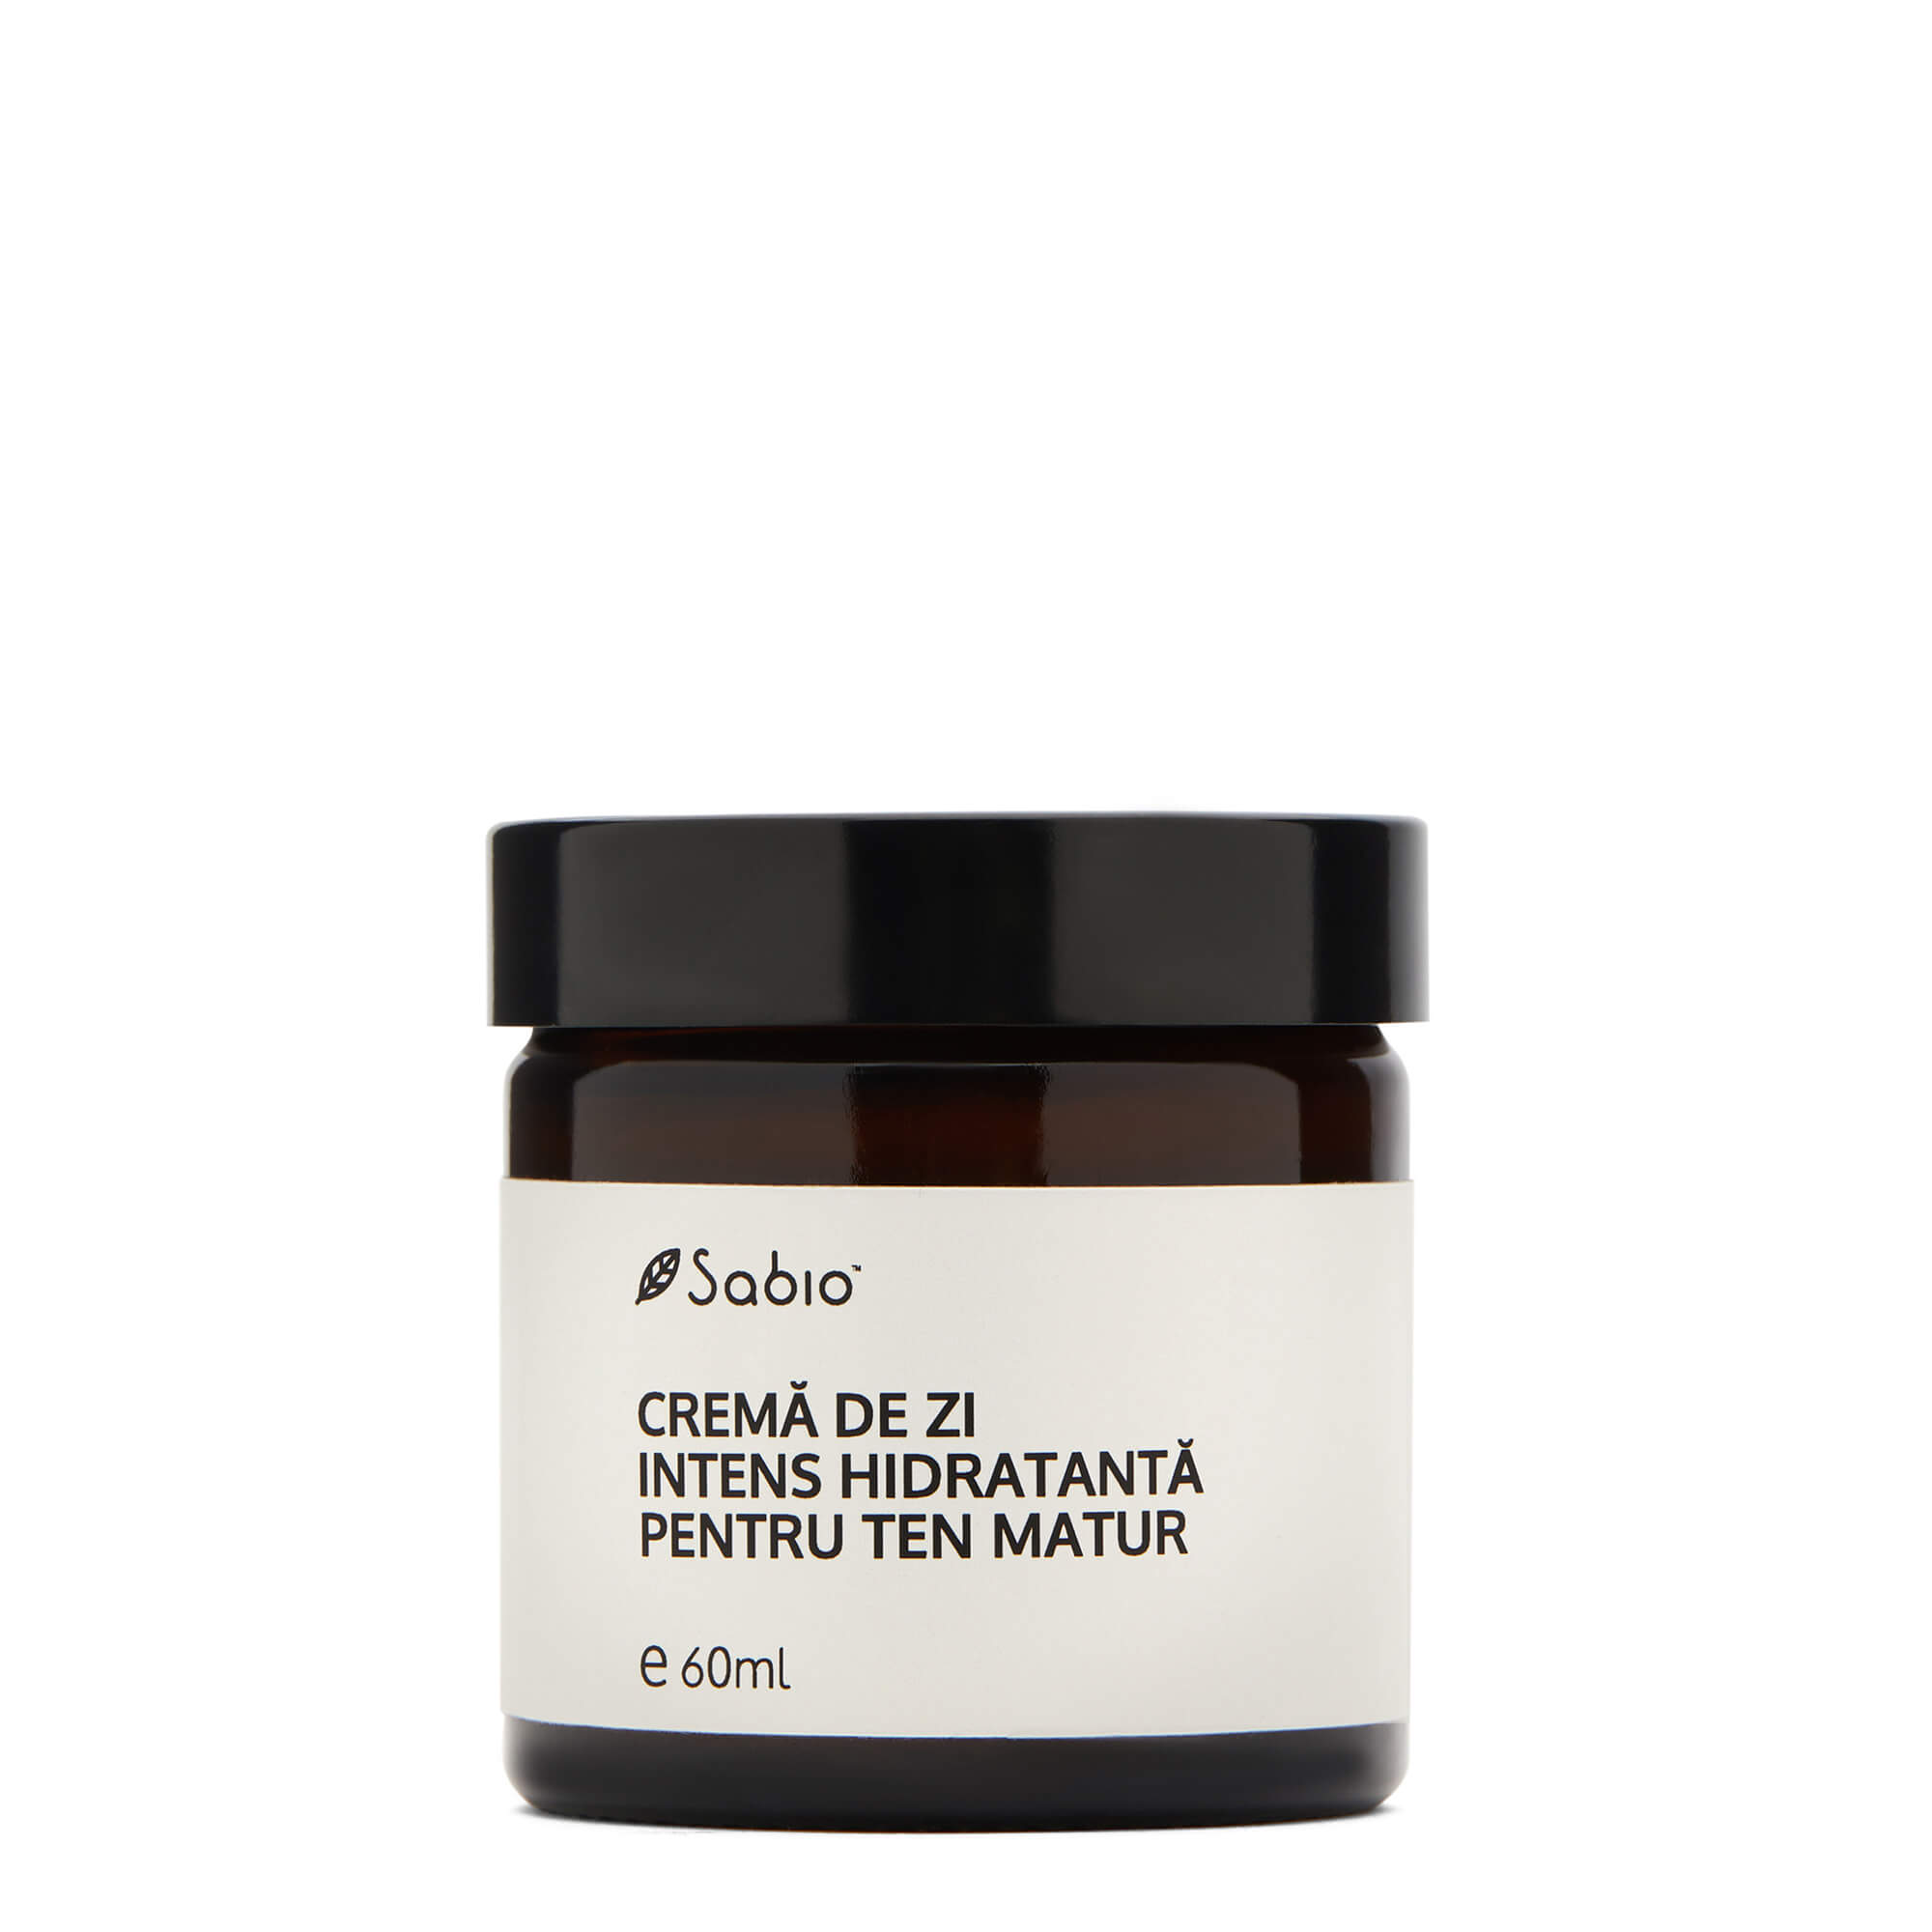 Intensely hydrating day cream for mature skin